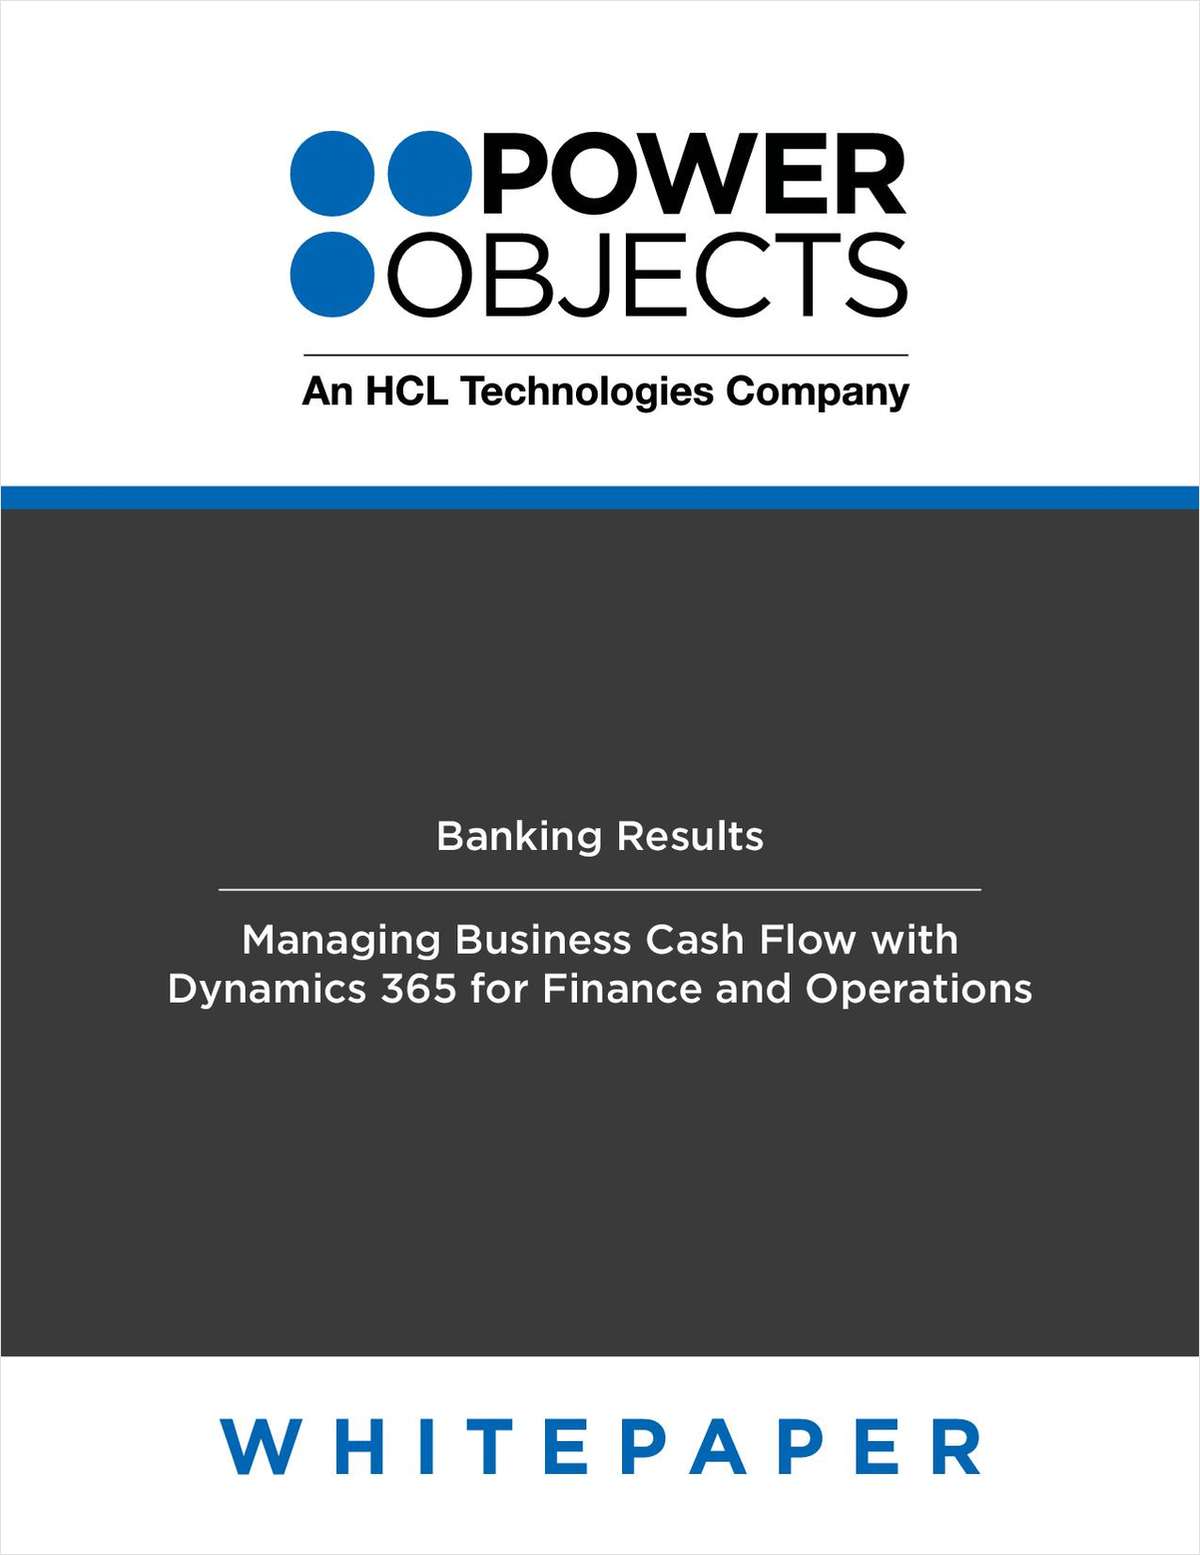 Managing Business Cash Flow with Dynamics 365 for Finance and Operations